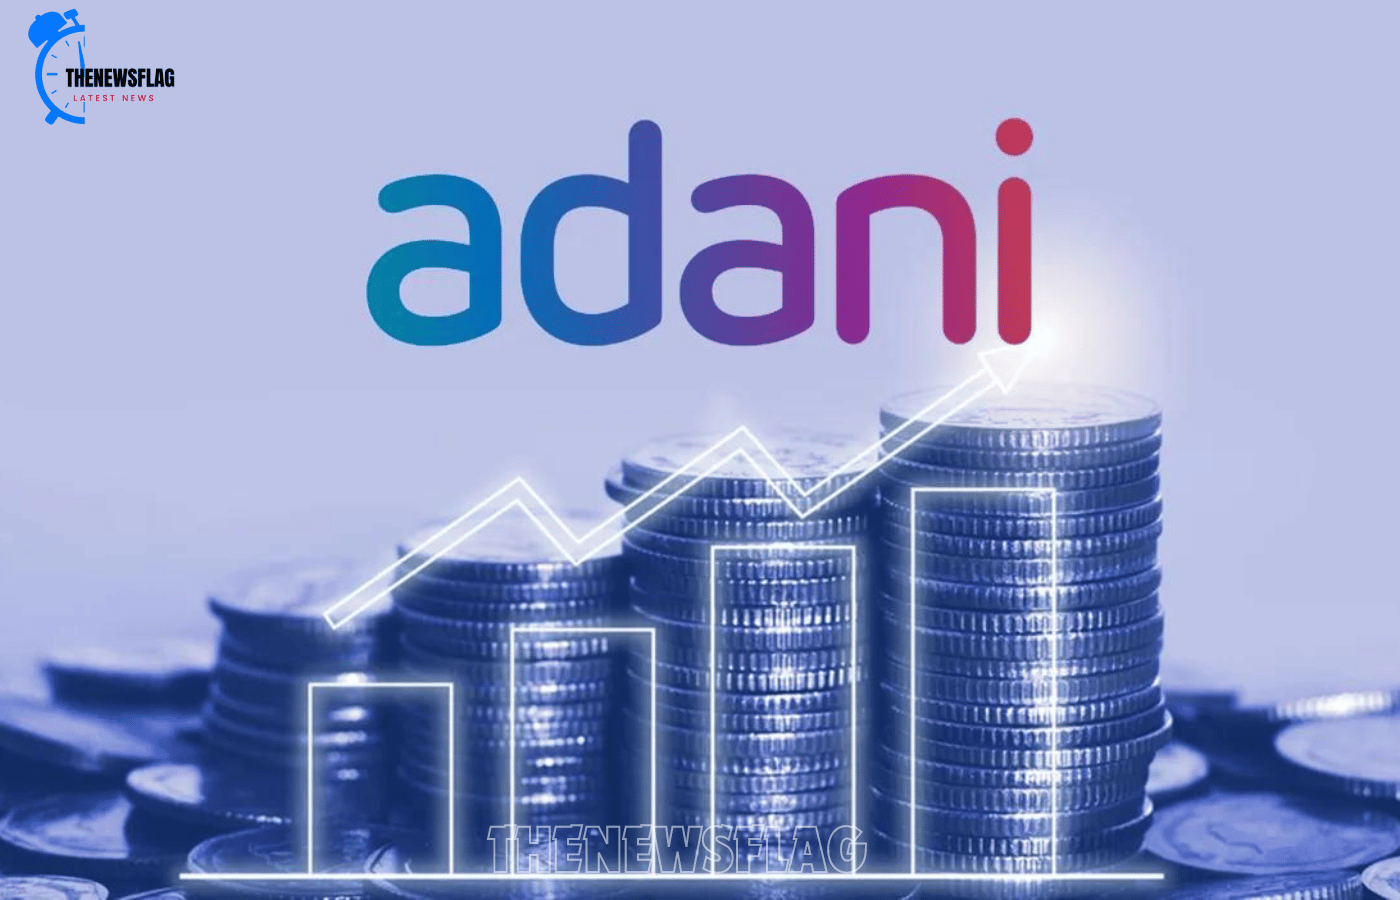 Current state of the stock market: The market capitalization of Adani rises by up to 7% with a gain of 10 shares. The biggest gainer is...